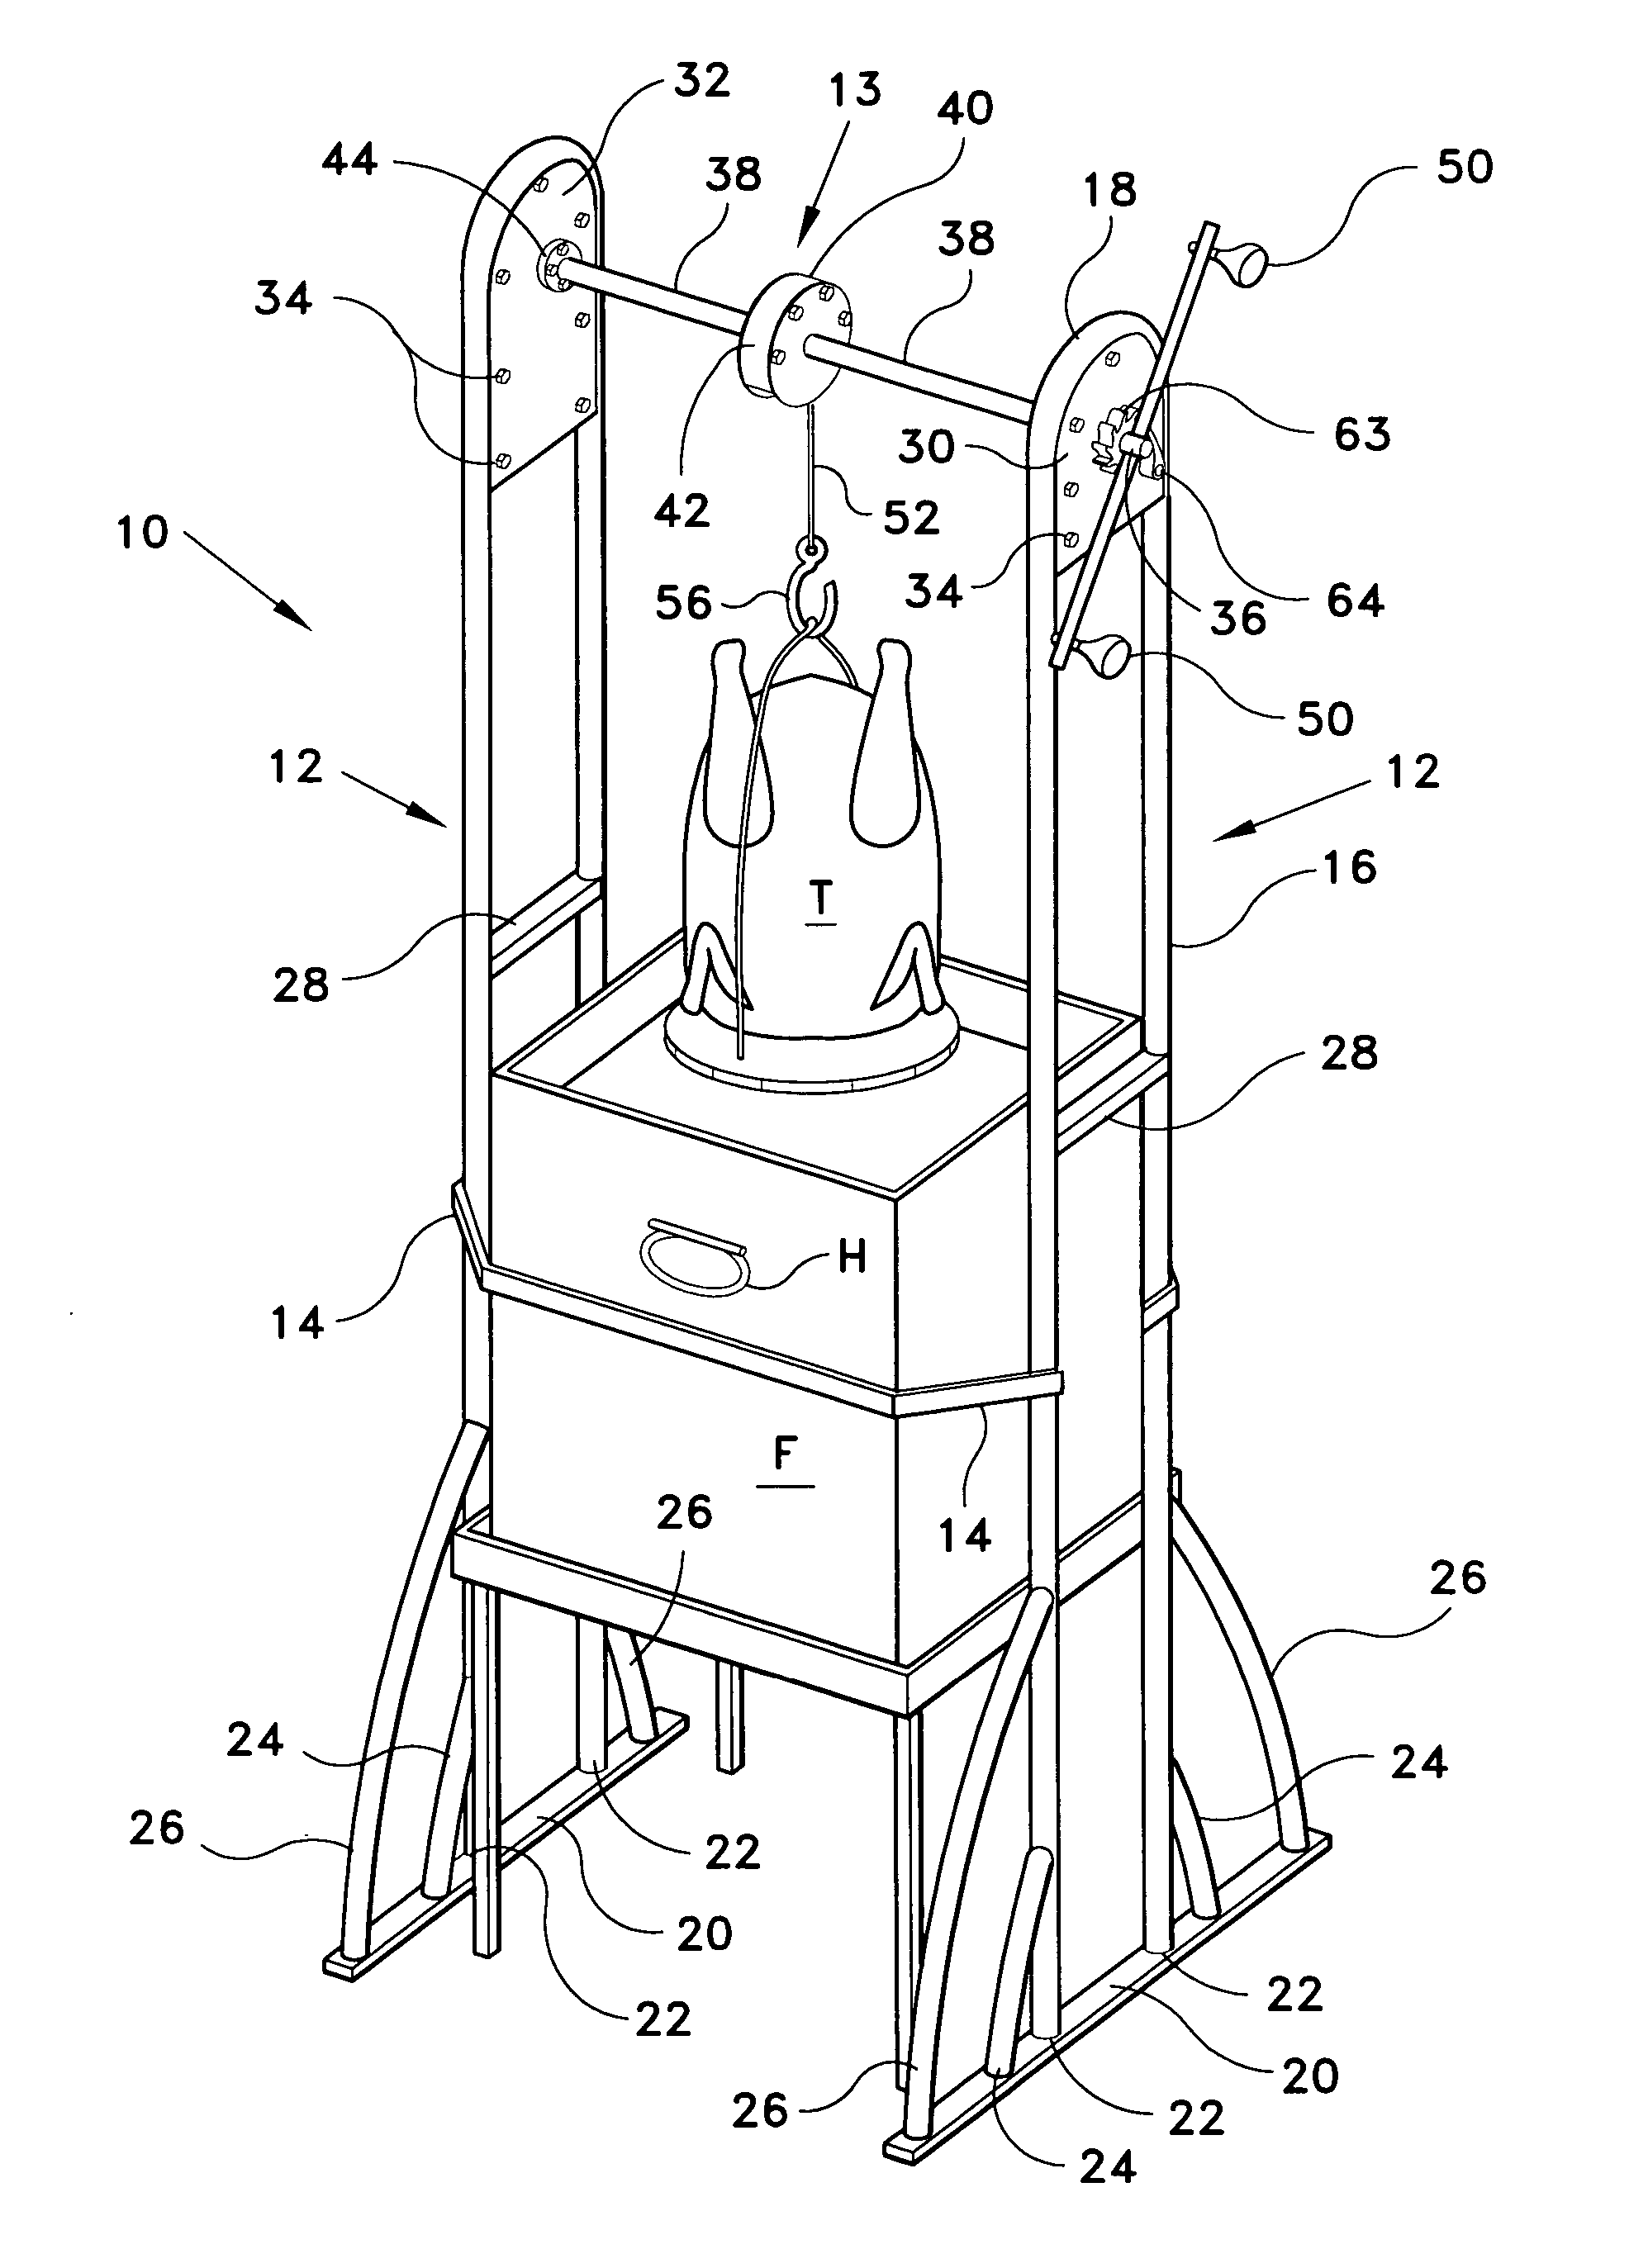 Frying/boiling stand with hoist